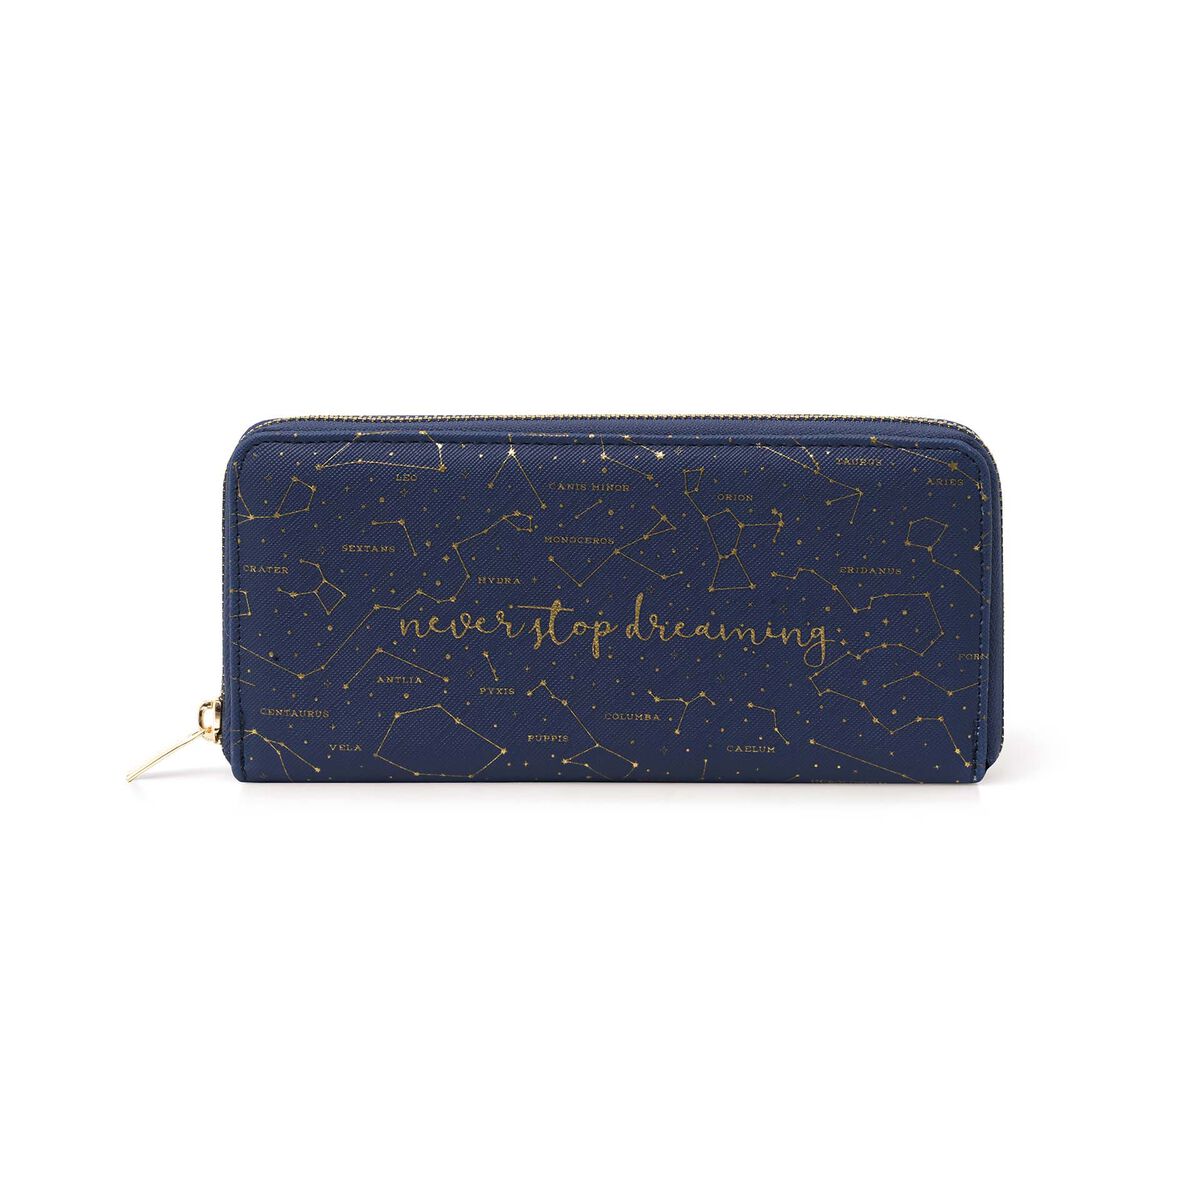 Portefeuille - What A Wallet !, , zoo